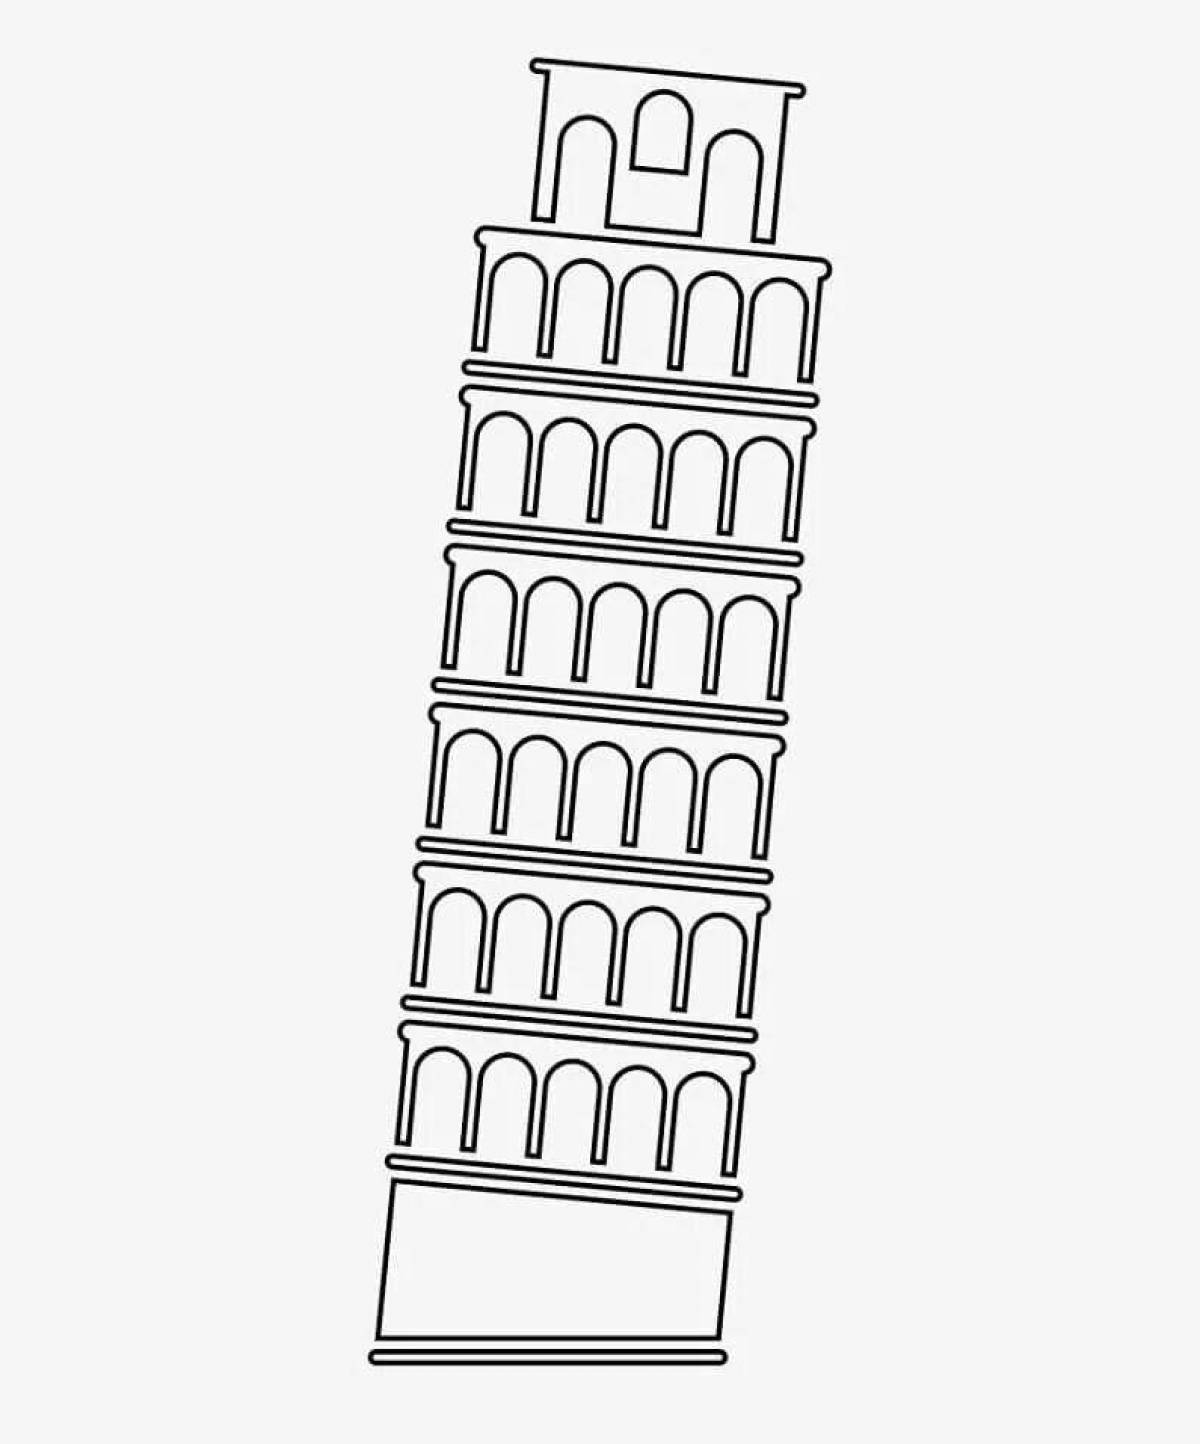 Fabulous coloring of the Leaning Tower of Pisa